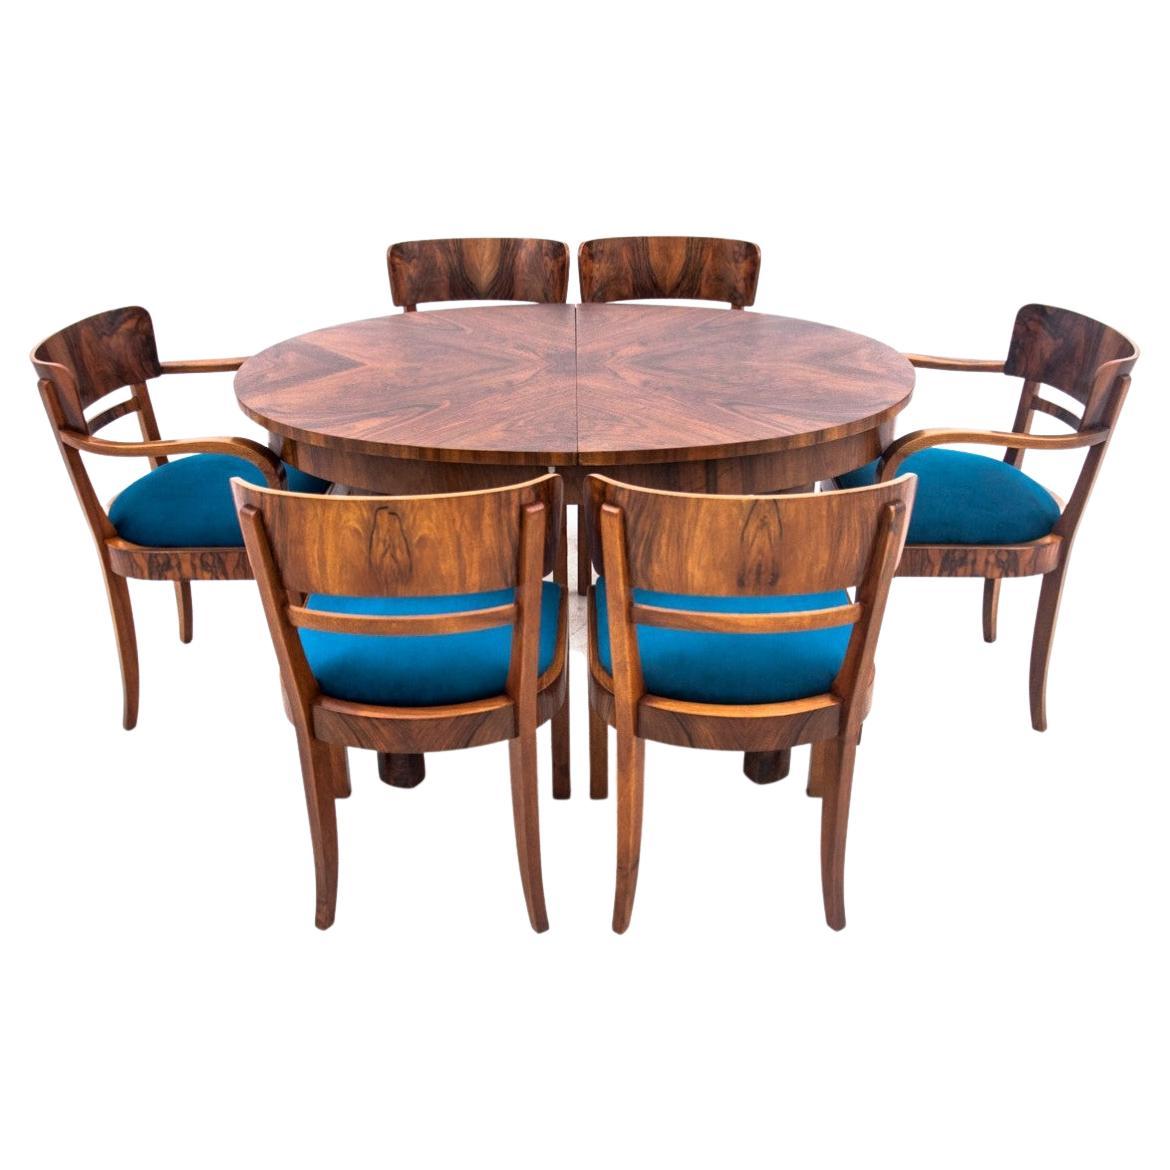 Dining Table with Chairs and Armchairs in Art Deco Style, Poland, 1940s